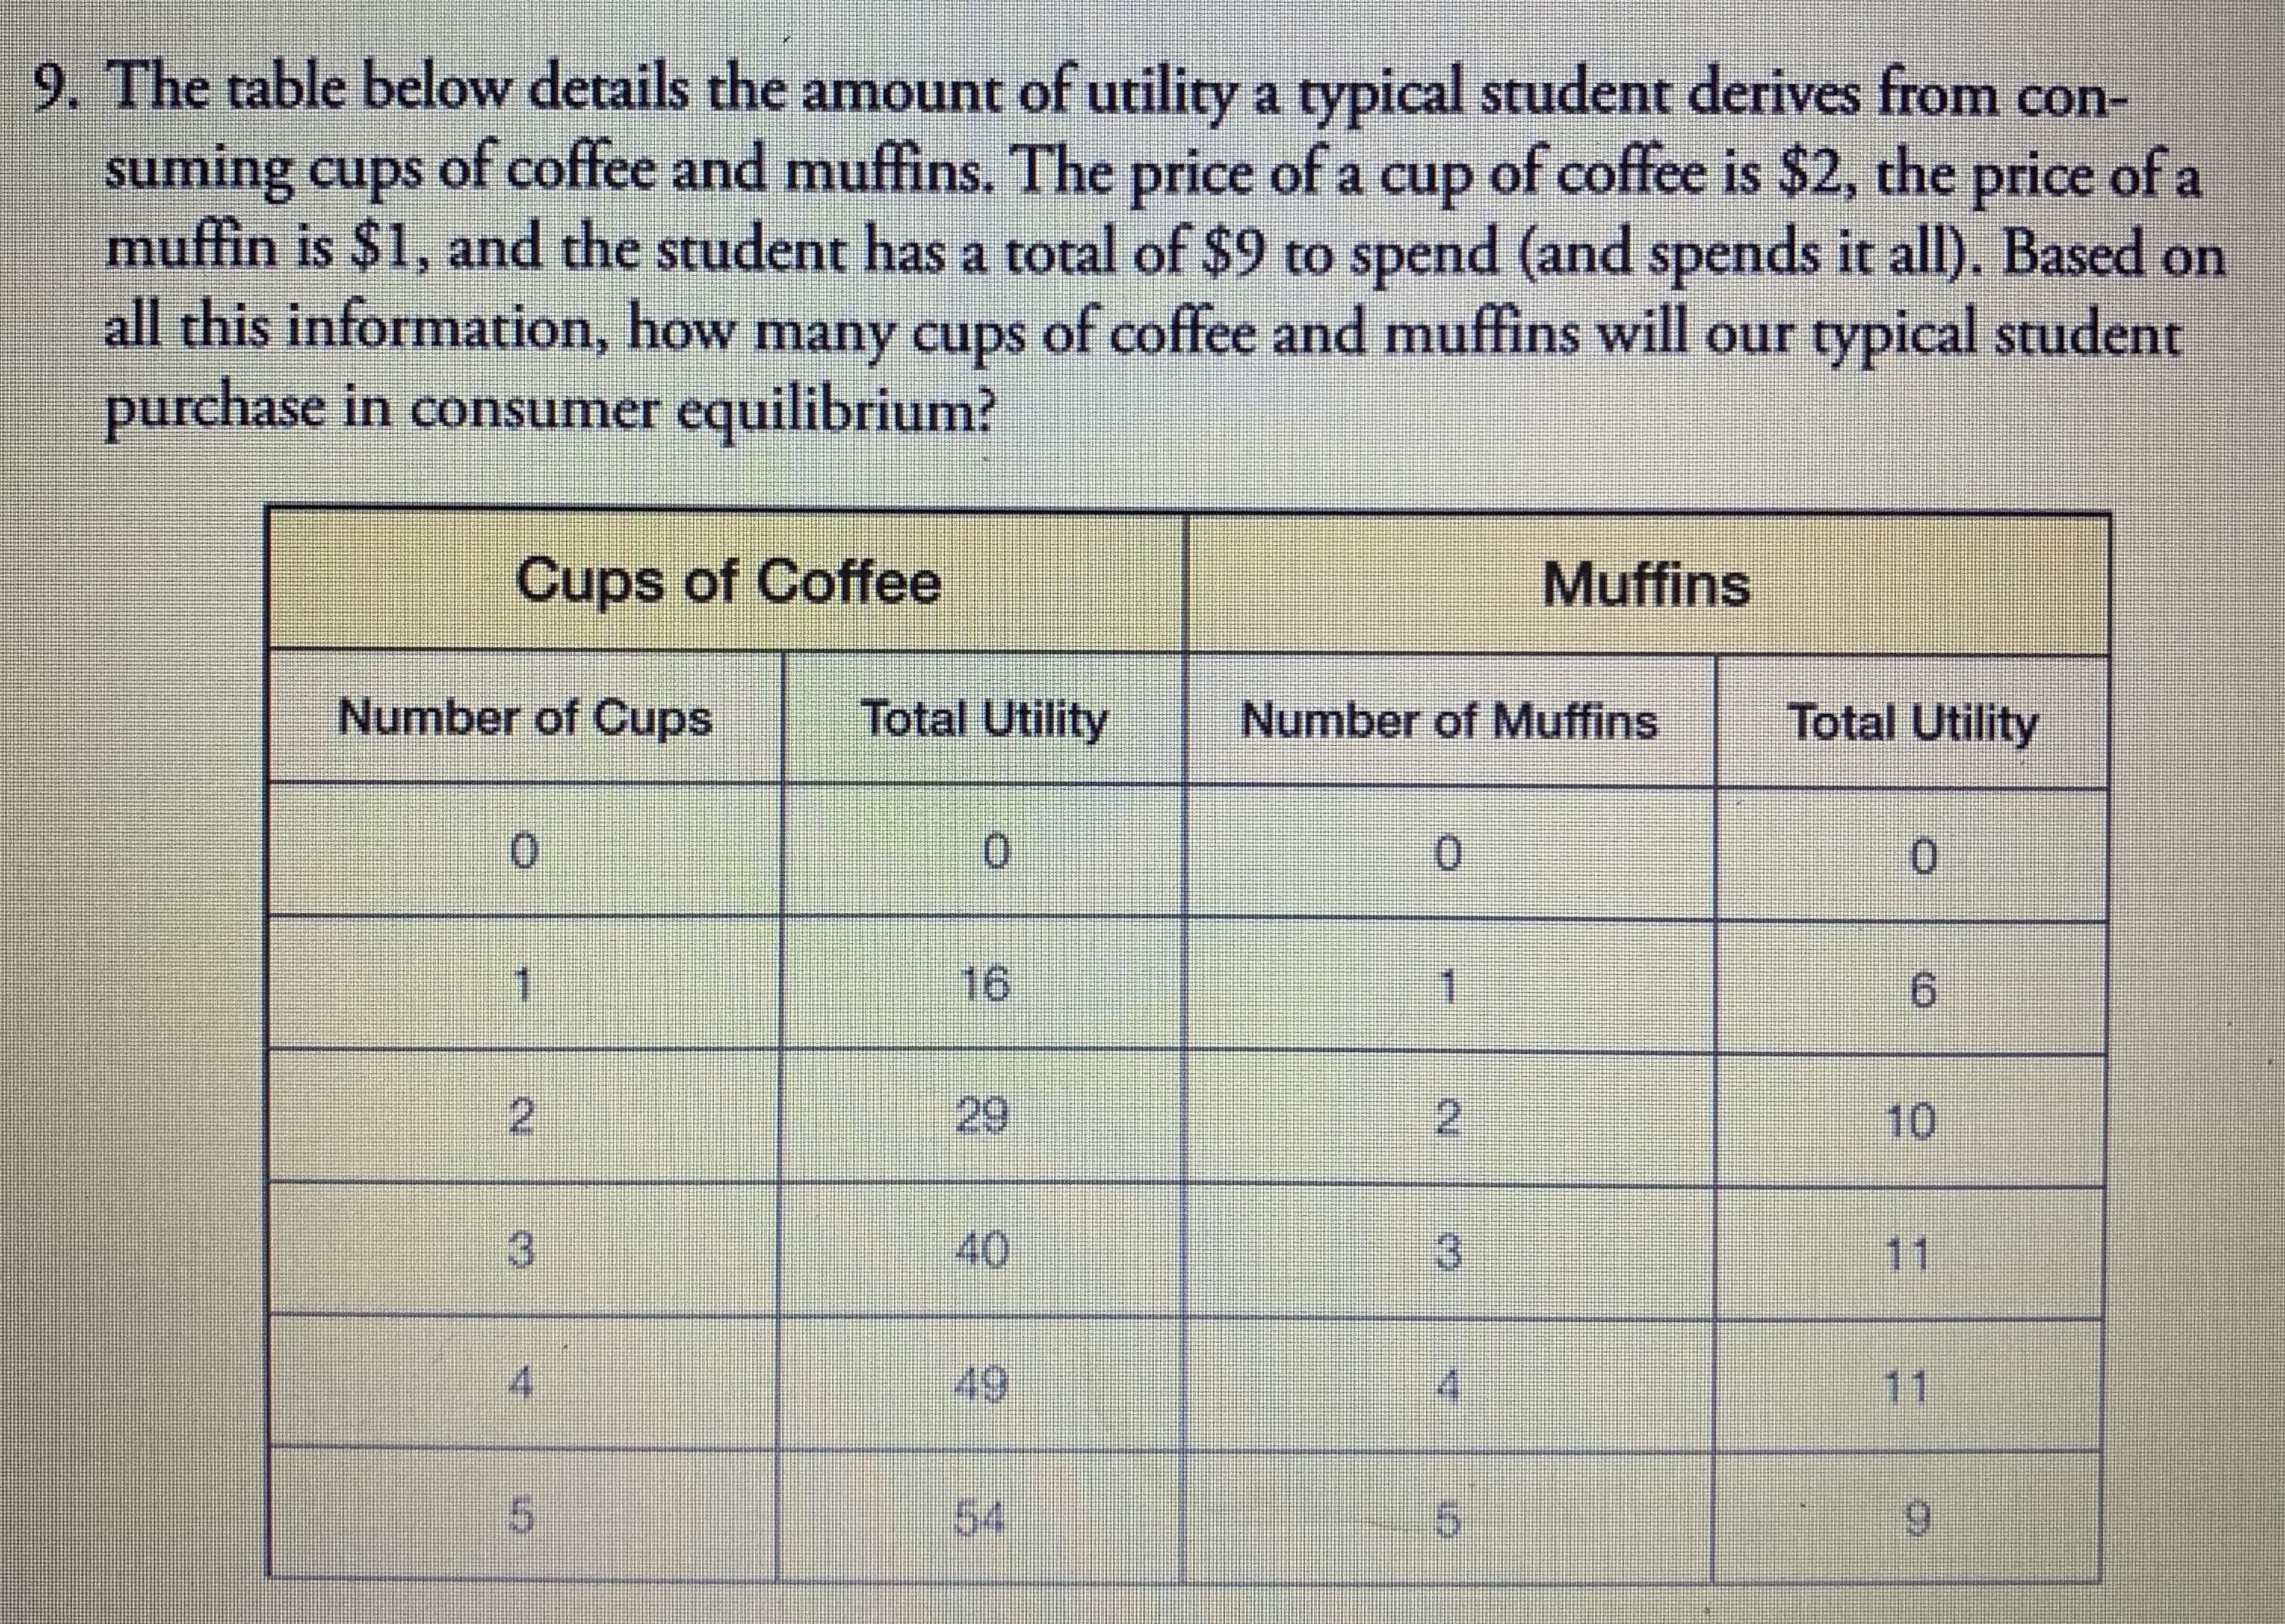 9. The table below details the amount of utility a typical student derives from con-
suming cups of coffee and muffins. The price of a cup of coffee is $2, the price of a
muffin is $1, and the student has a total of $9 to spend (and spends it all). Based on
all this information, how many cups of coffee and muffins will our typical student
purchase in consumer equilibrium?
j
Muffins
Cups of Coffee
Number of Cups
Total Utility
Total Utility
Number of Muffins
0.
0.
0.
16
1
29
2.
10
3.
11
49
4.
4.
5.
54
6.
11
40
2.
